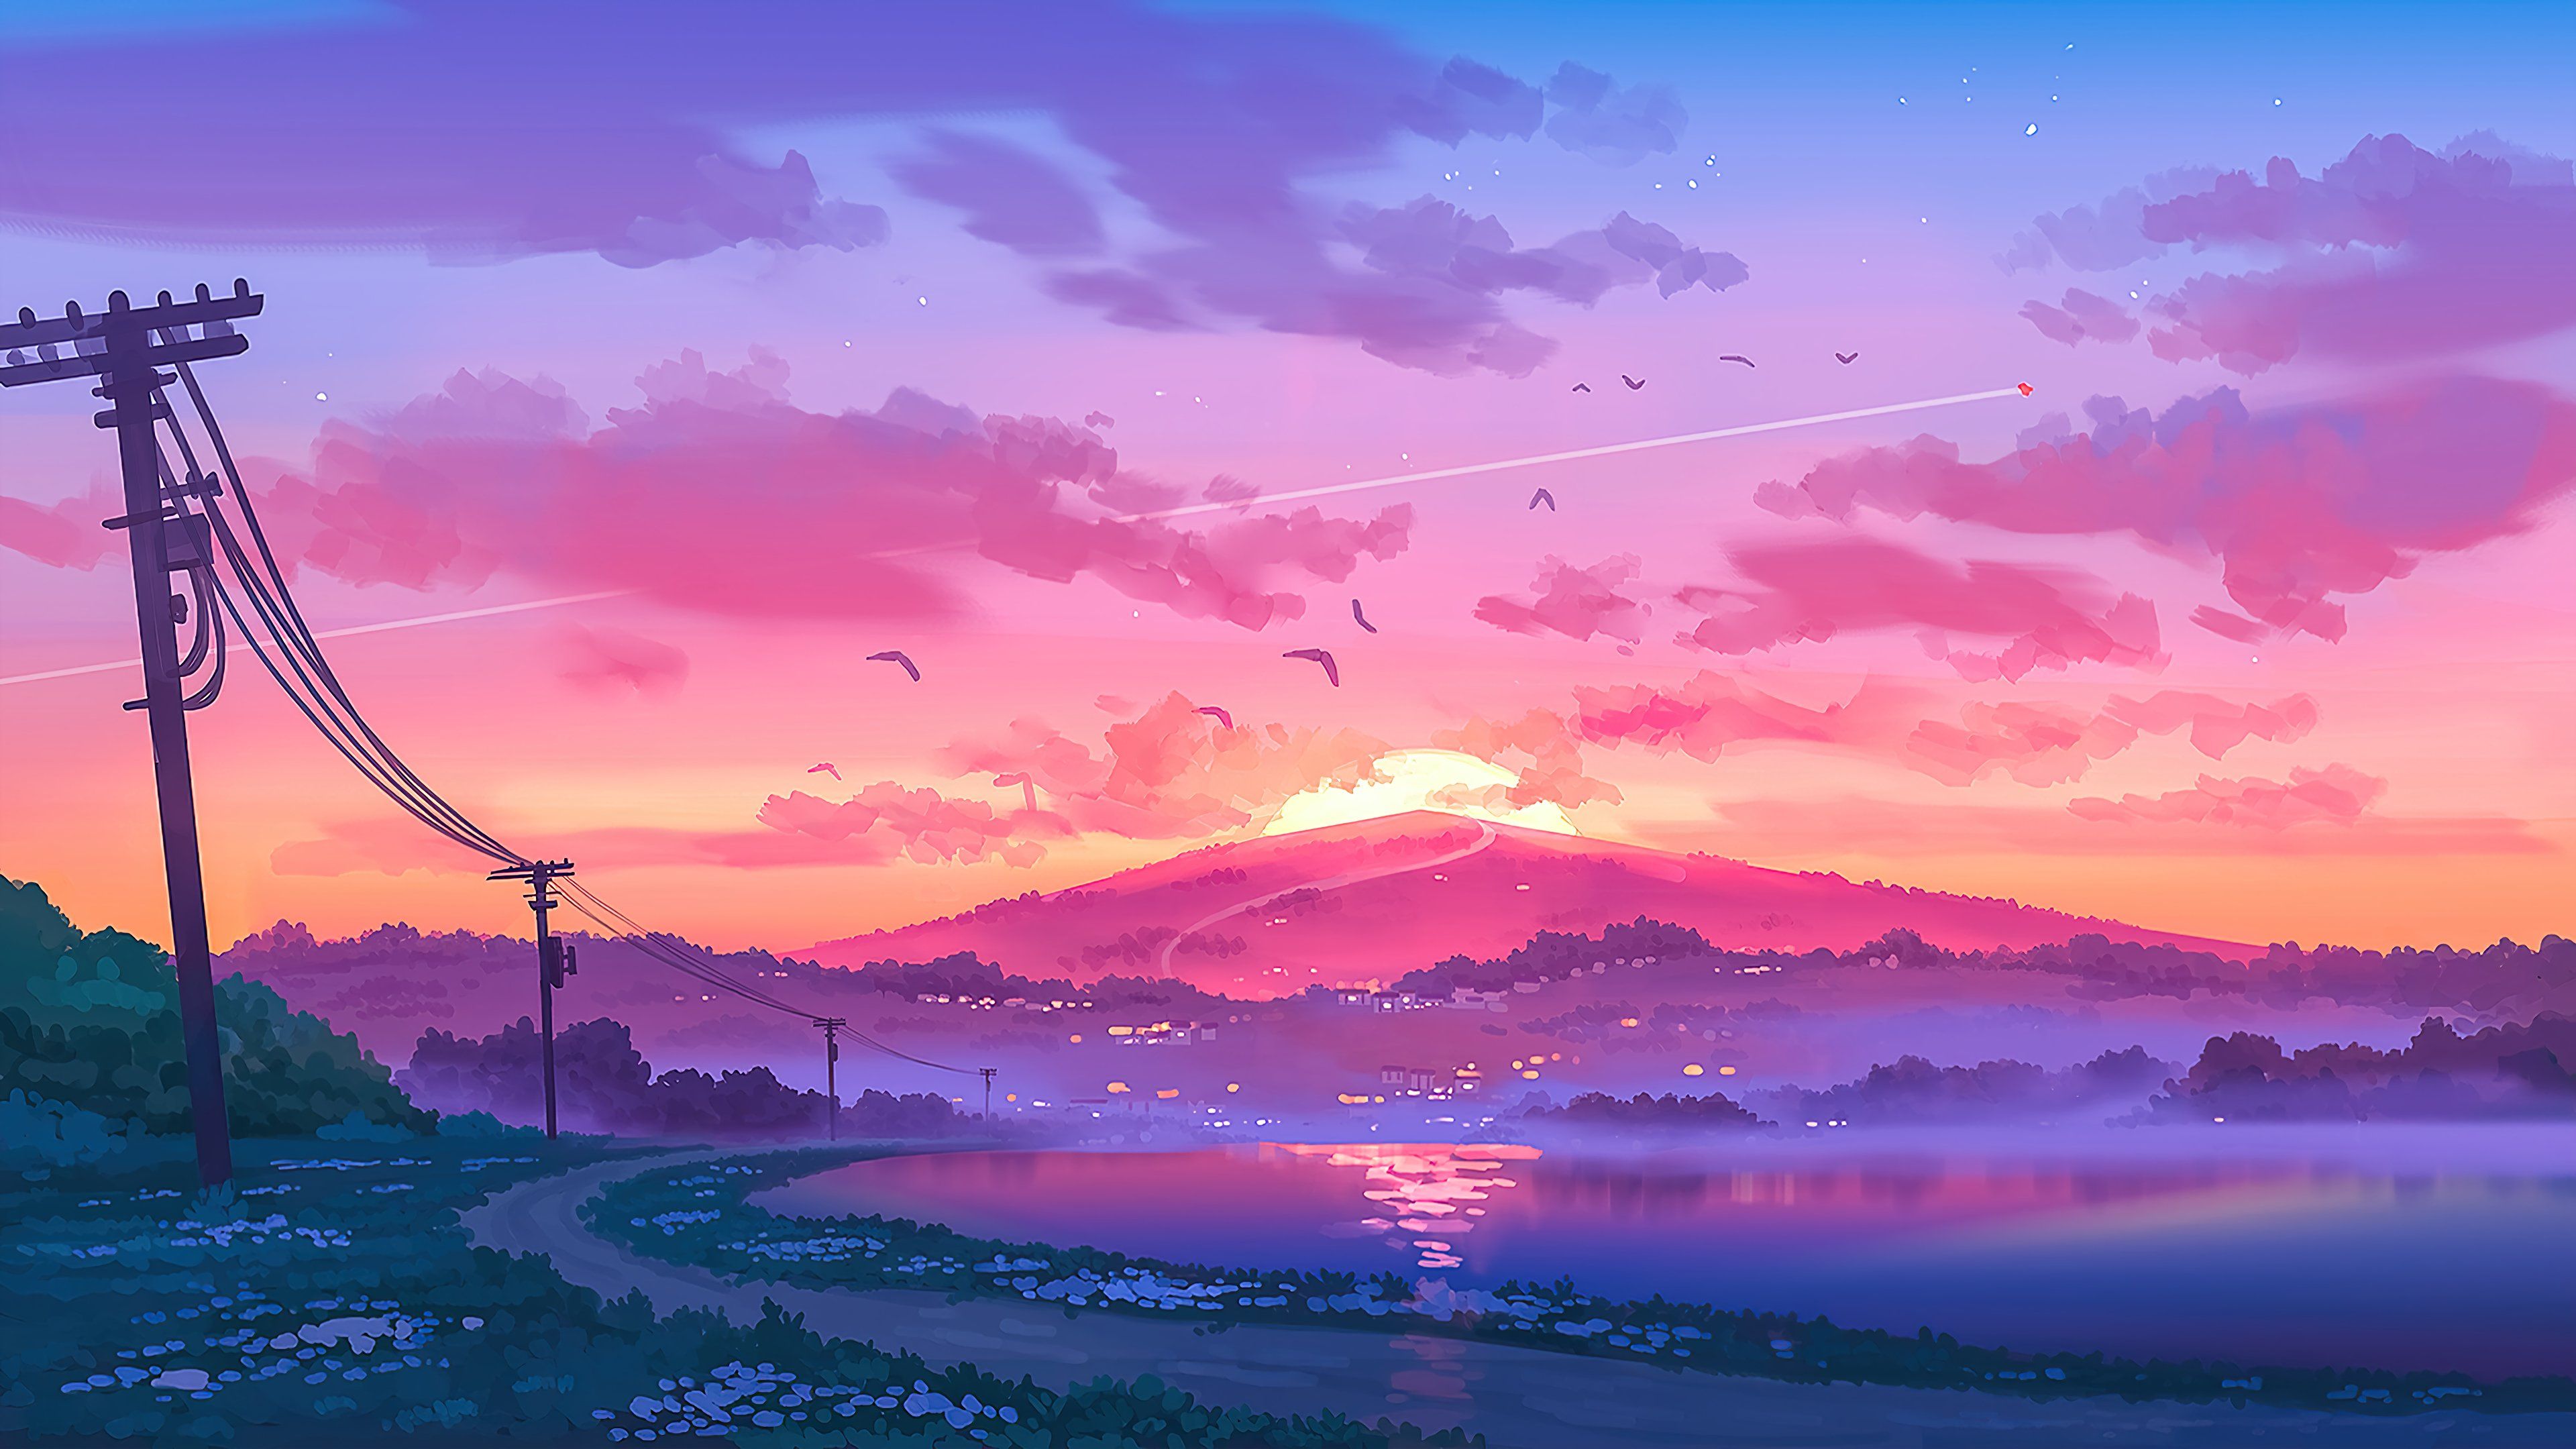 A painting of the sun setting over water - Anime sunset, landscape